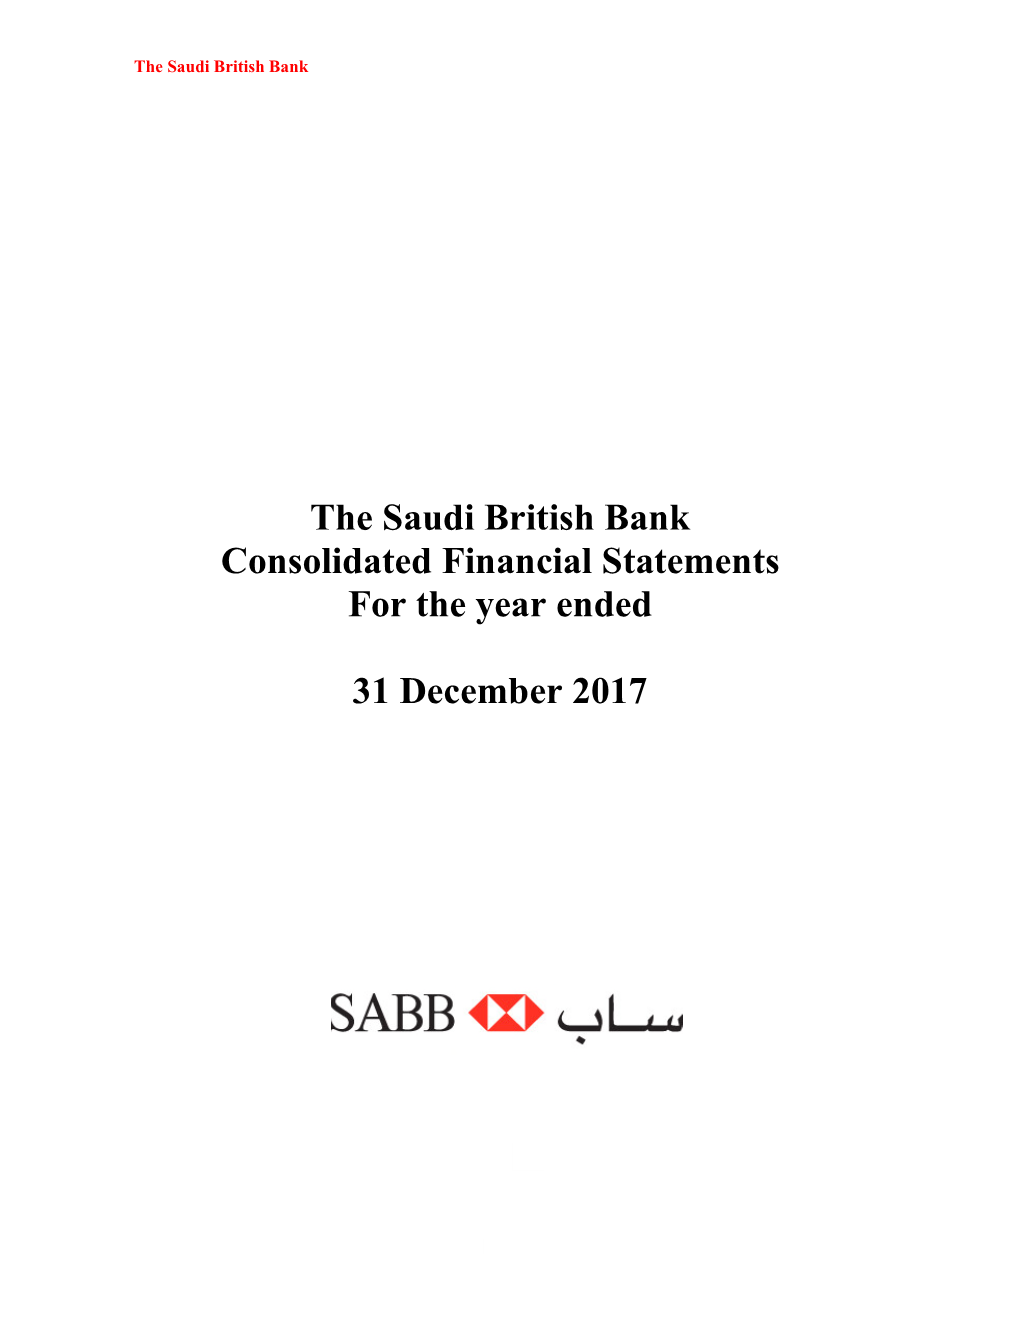 The Saudi British Bank Consolidated Financial Statements for the Year Ended